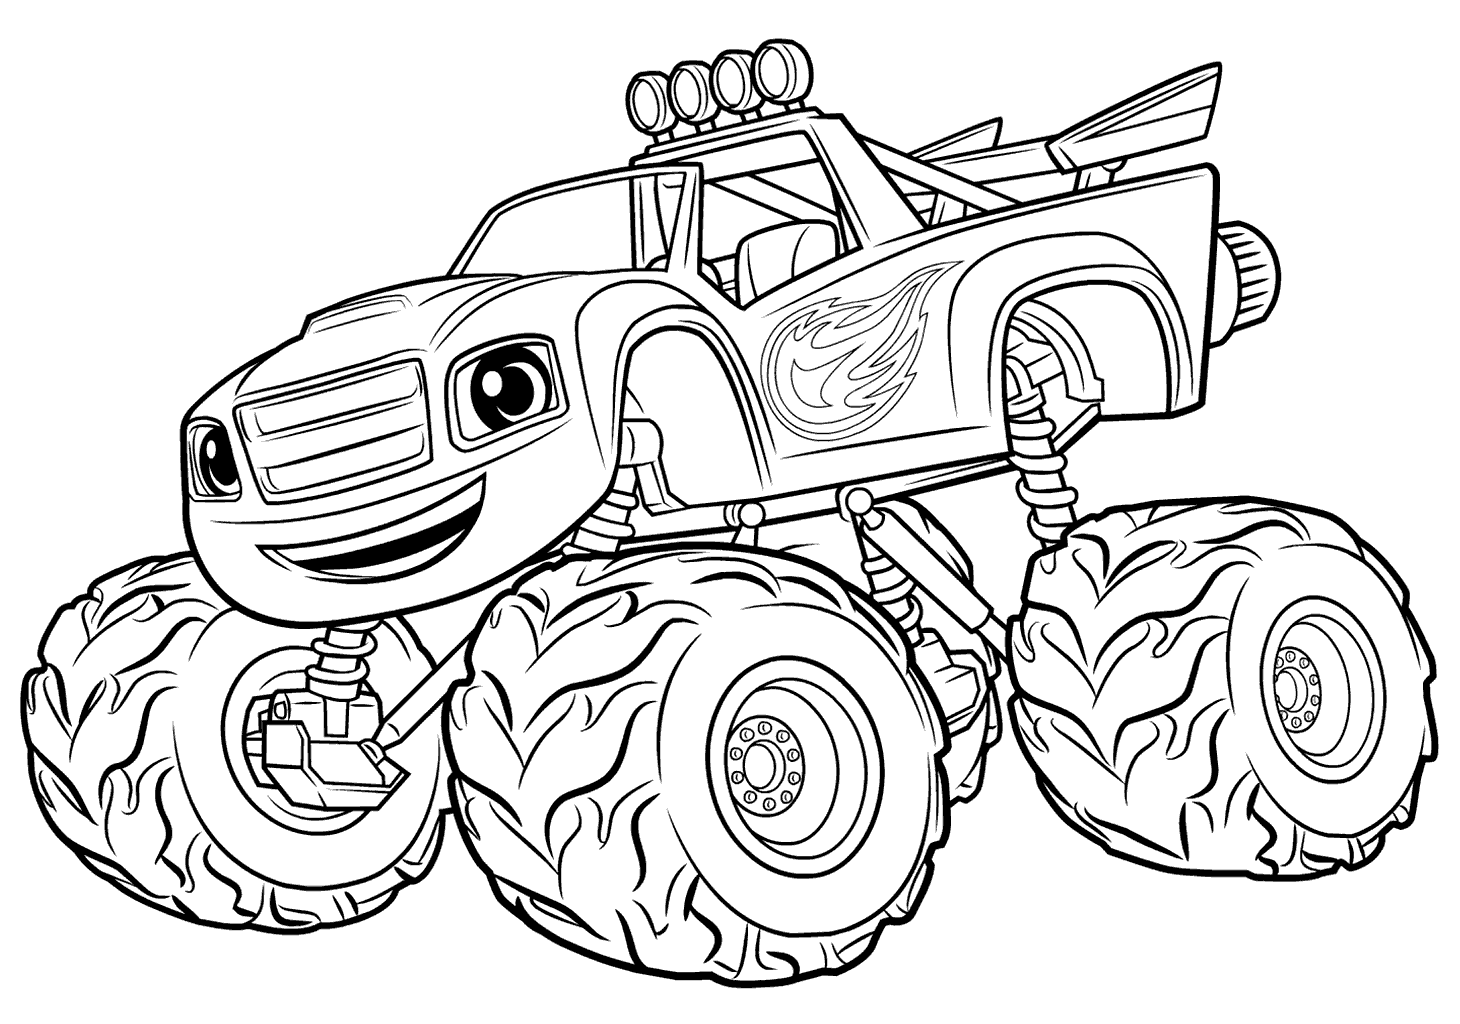 Blaze and the Monster Machines Coloring Pages - Best Coloring Pages For ...